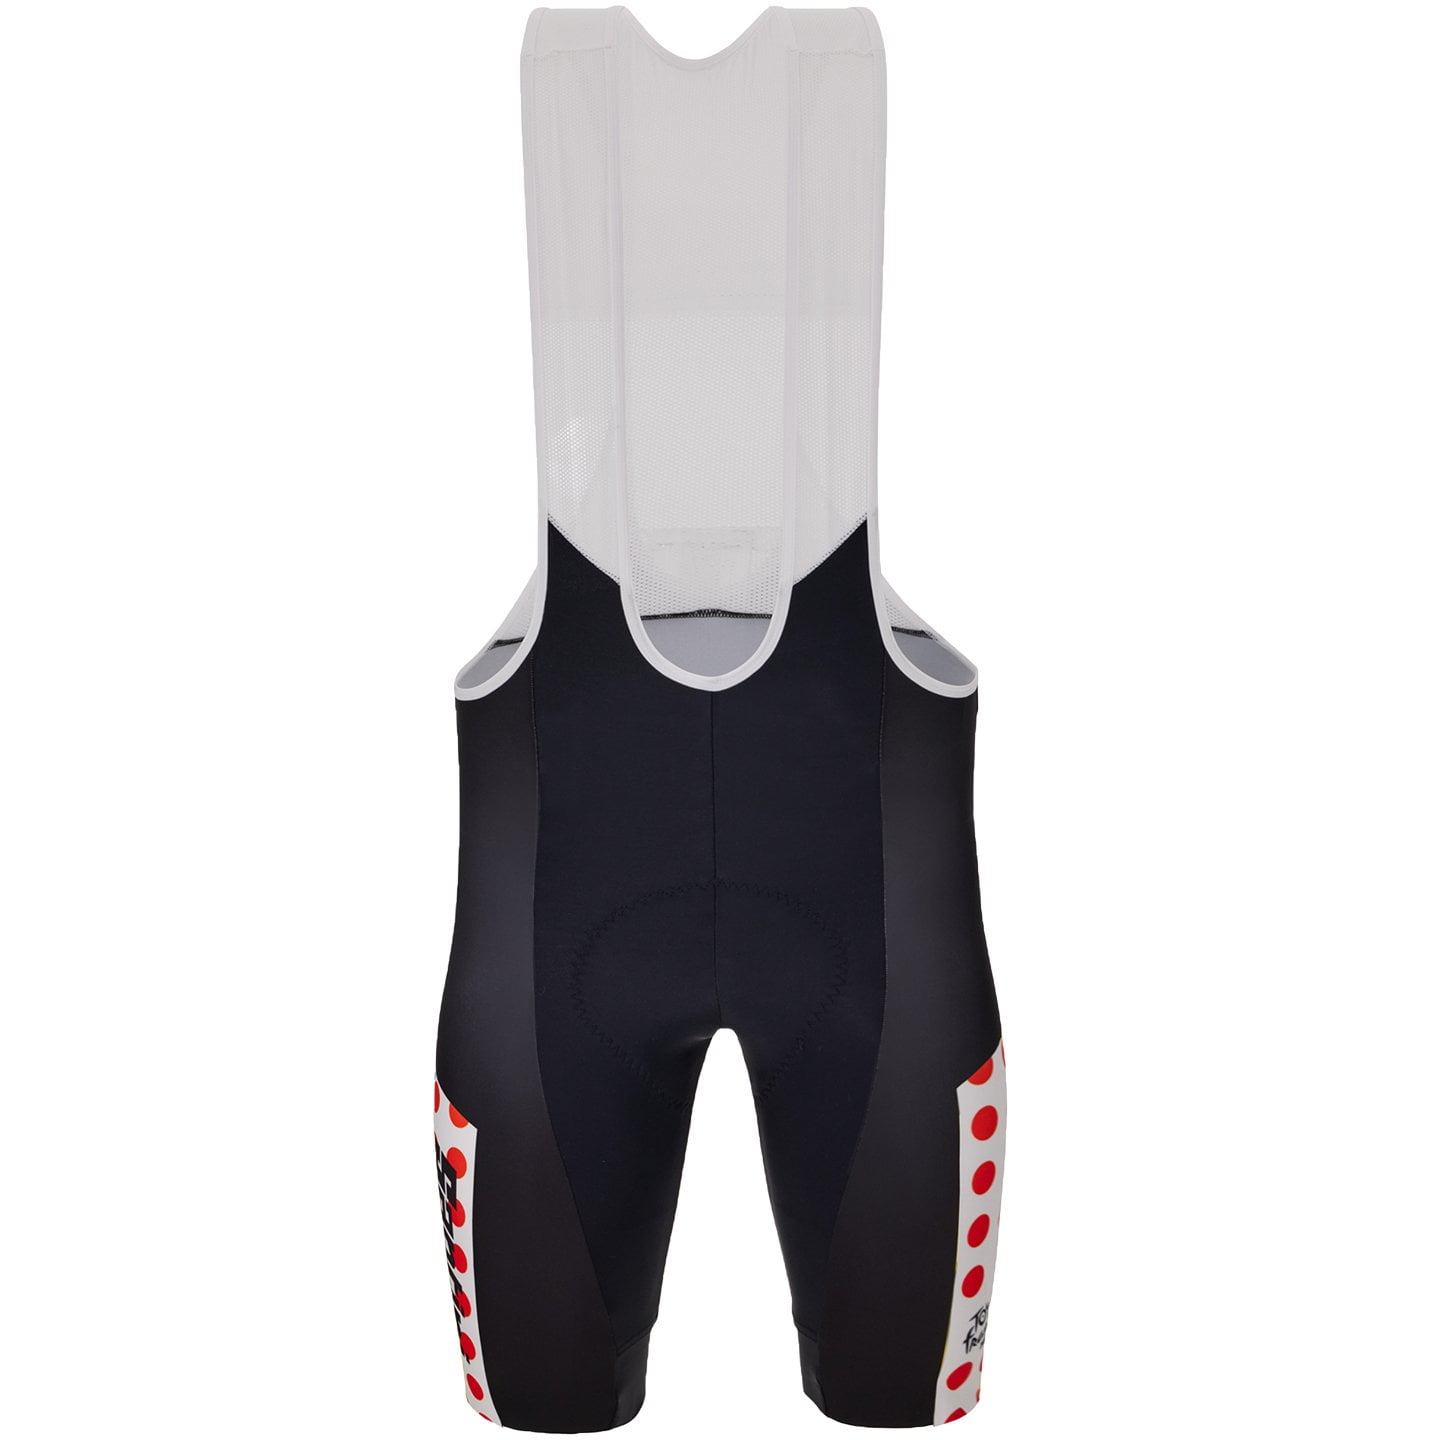 TOUR DE FRANCE GPM Leader 2024 Bib Shorts, for men, size M, Cycle shorts, Cycling clothing